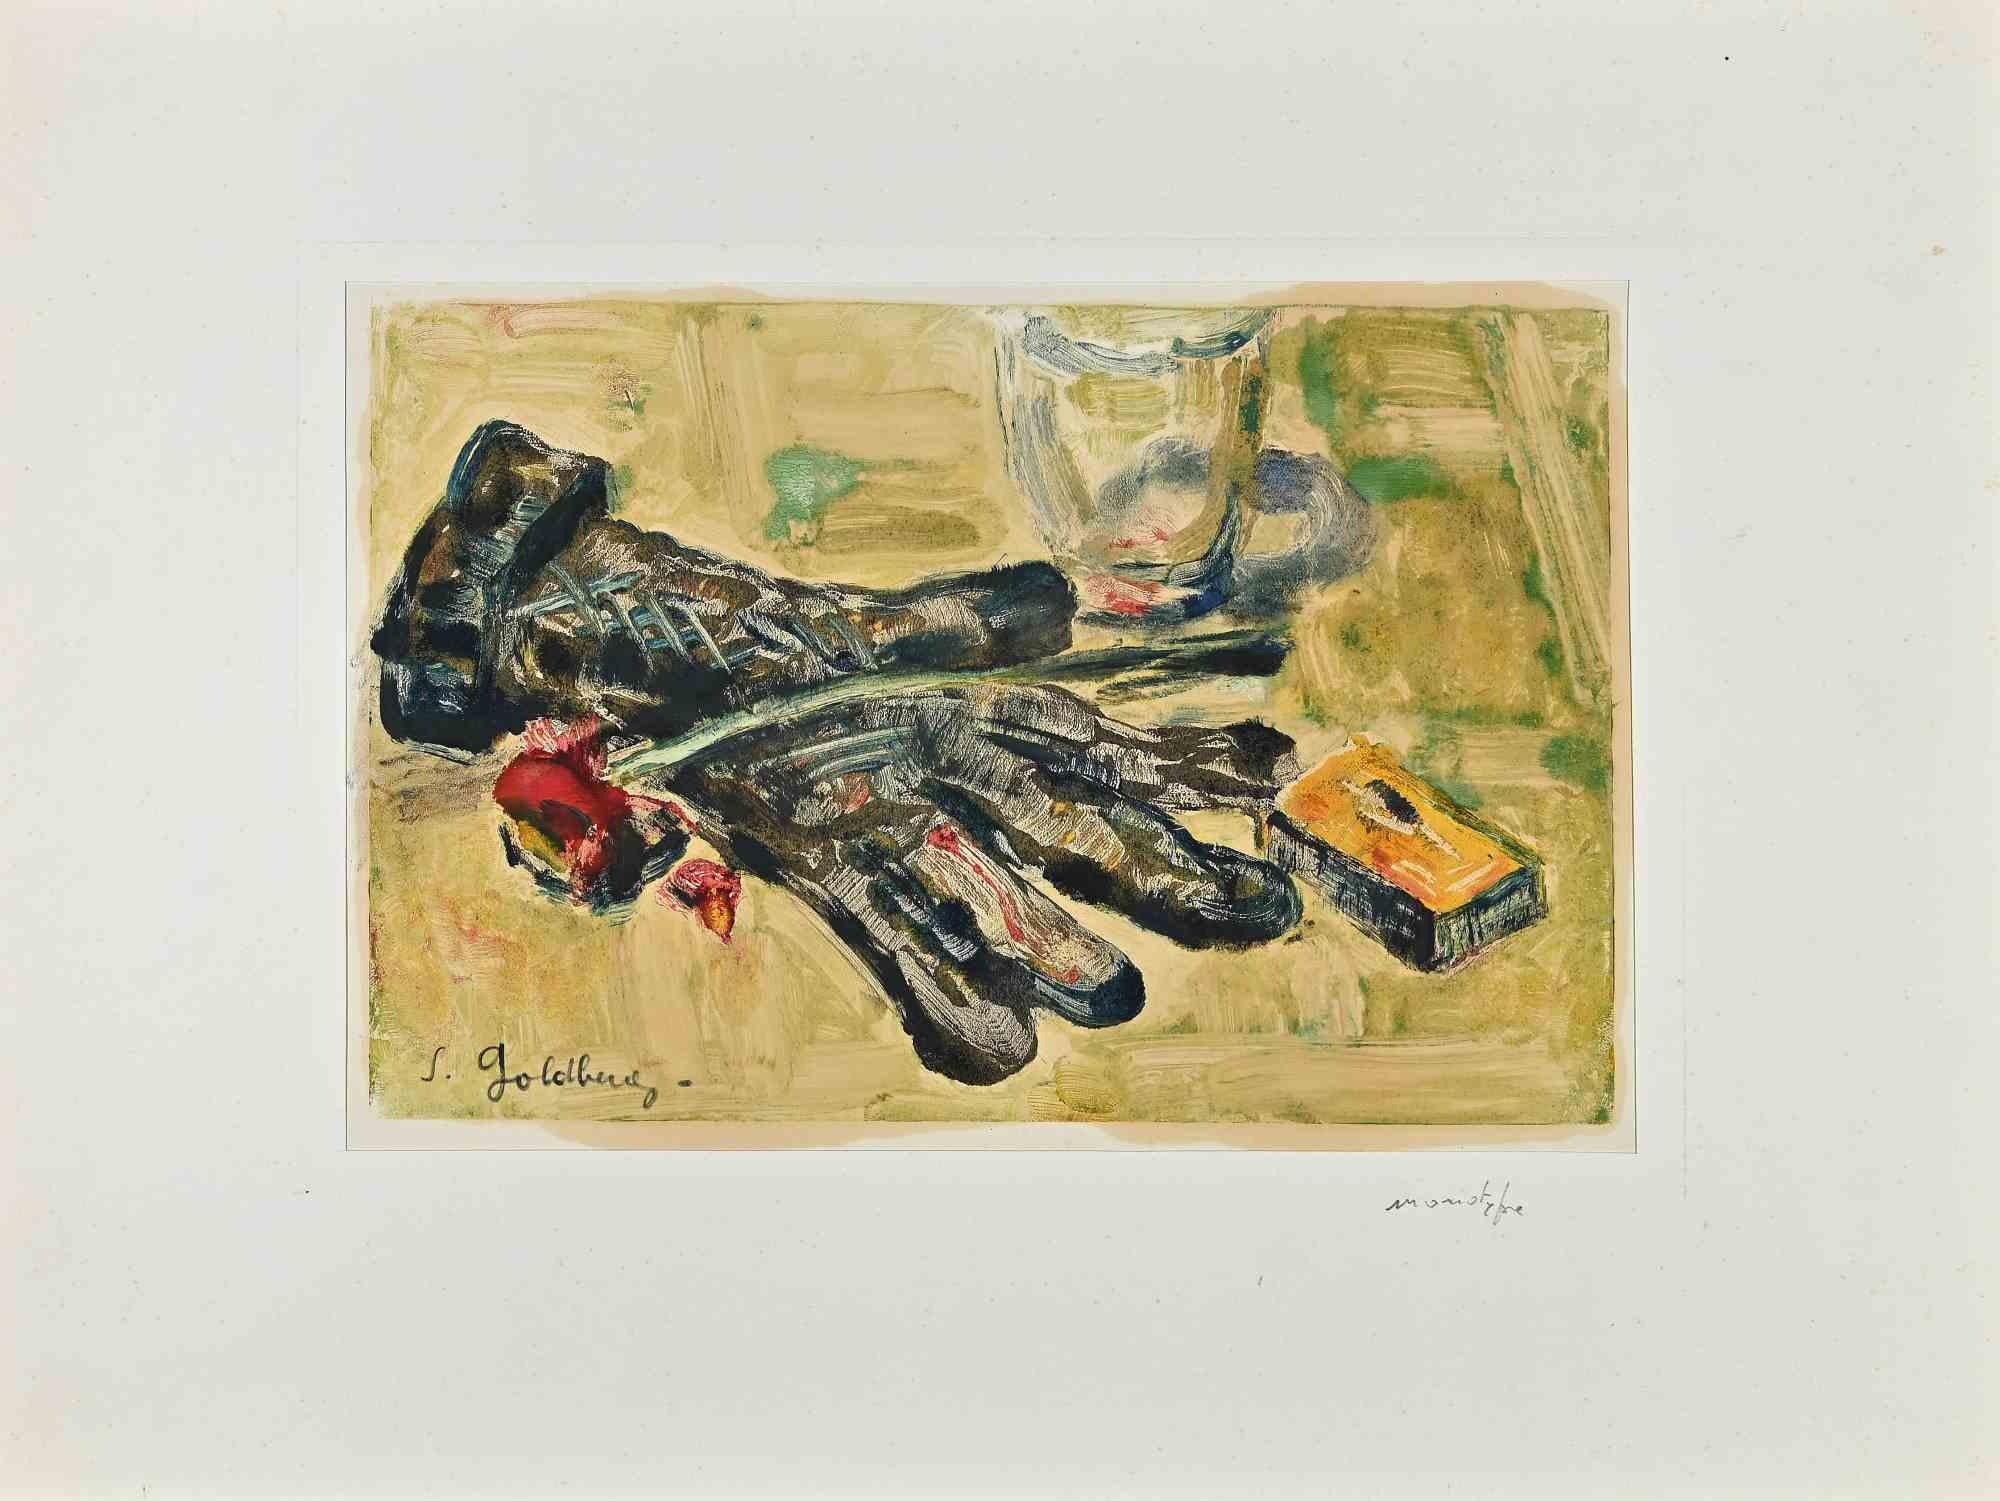 Still Life With Glove is a Monotype print realized by Simon Goldberg (1916-2002).

Good condition on a yellowed paper, included a cardboard passpartout (32x43 cm).

Hand-signed by the artist on the lower left corner.

Simon Goldberg was a Painter,